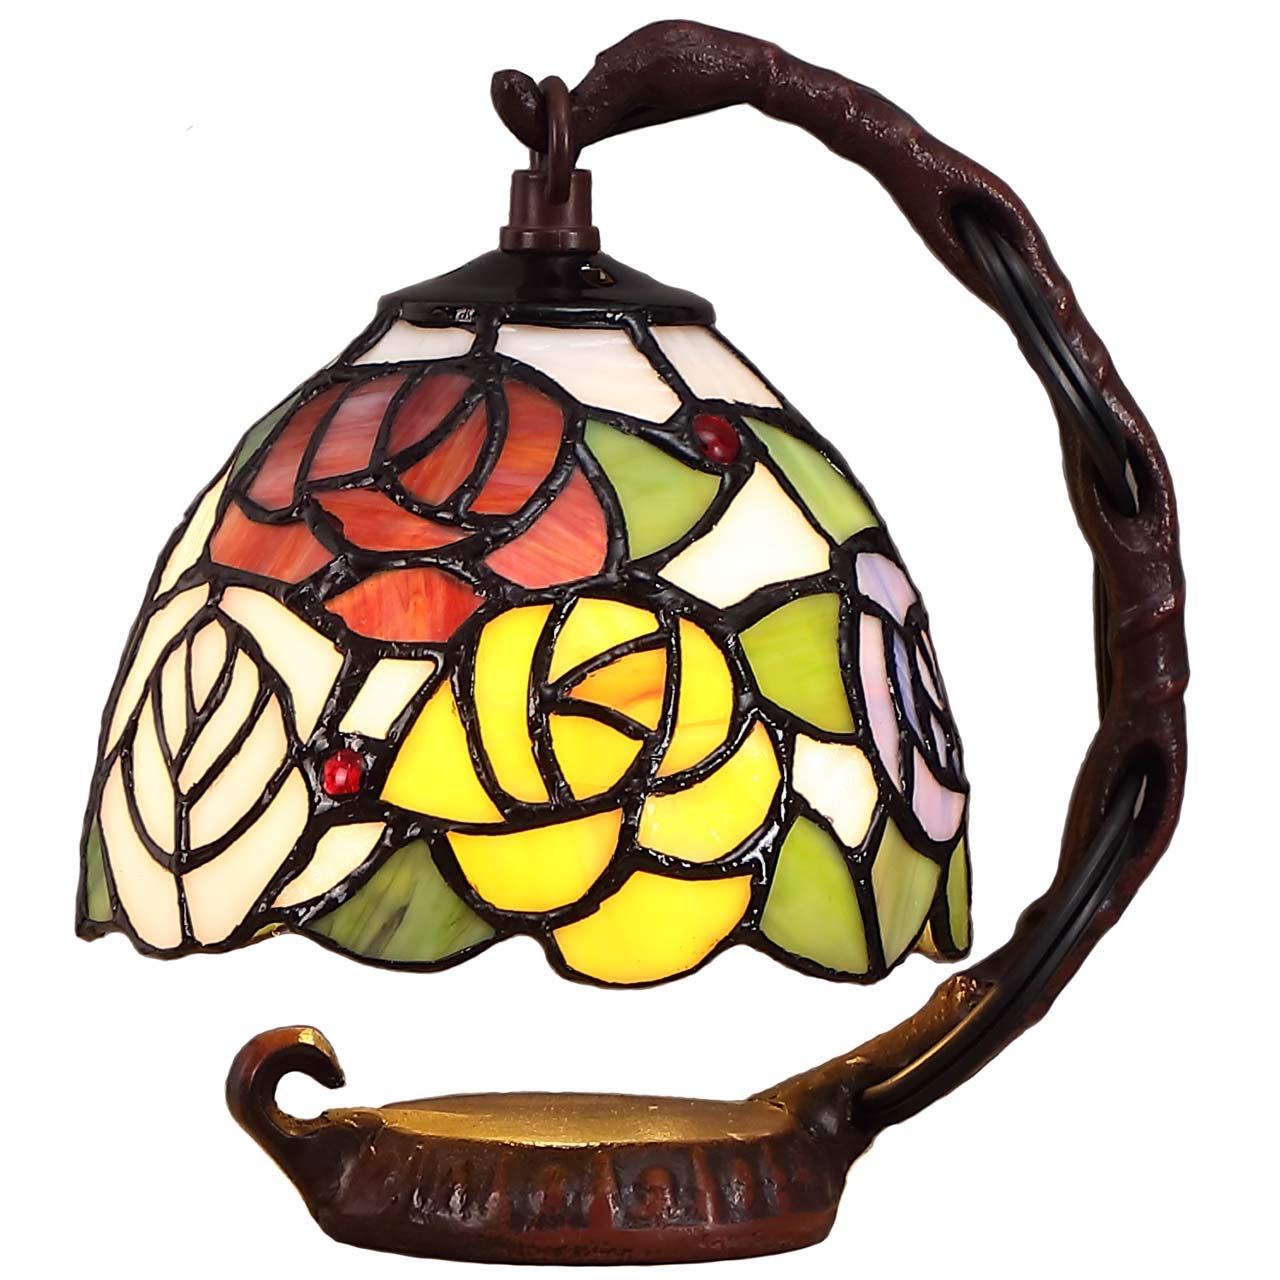 Bieye L10036 Rose Tiffany Style Stained Glass Table Lamp with 6-inch Wide Lampshade Hanging on The Cast Iron Base (Pink)